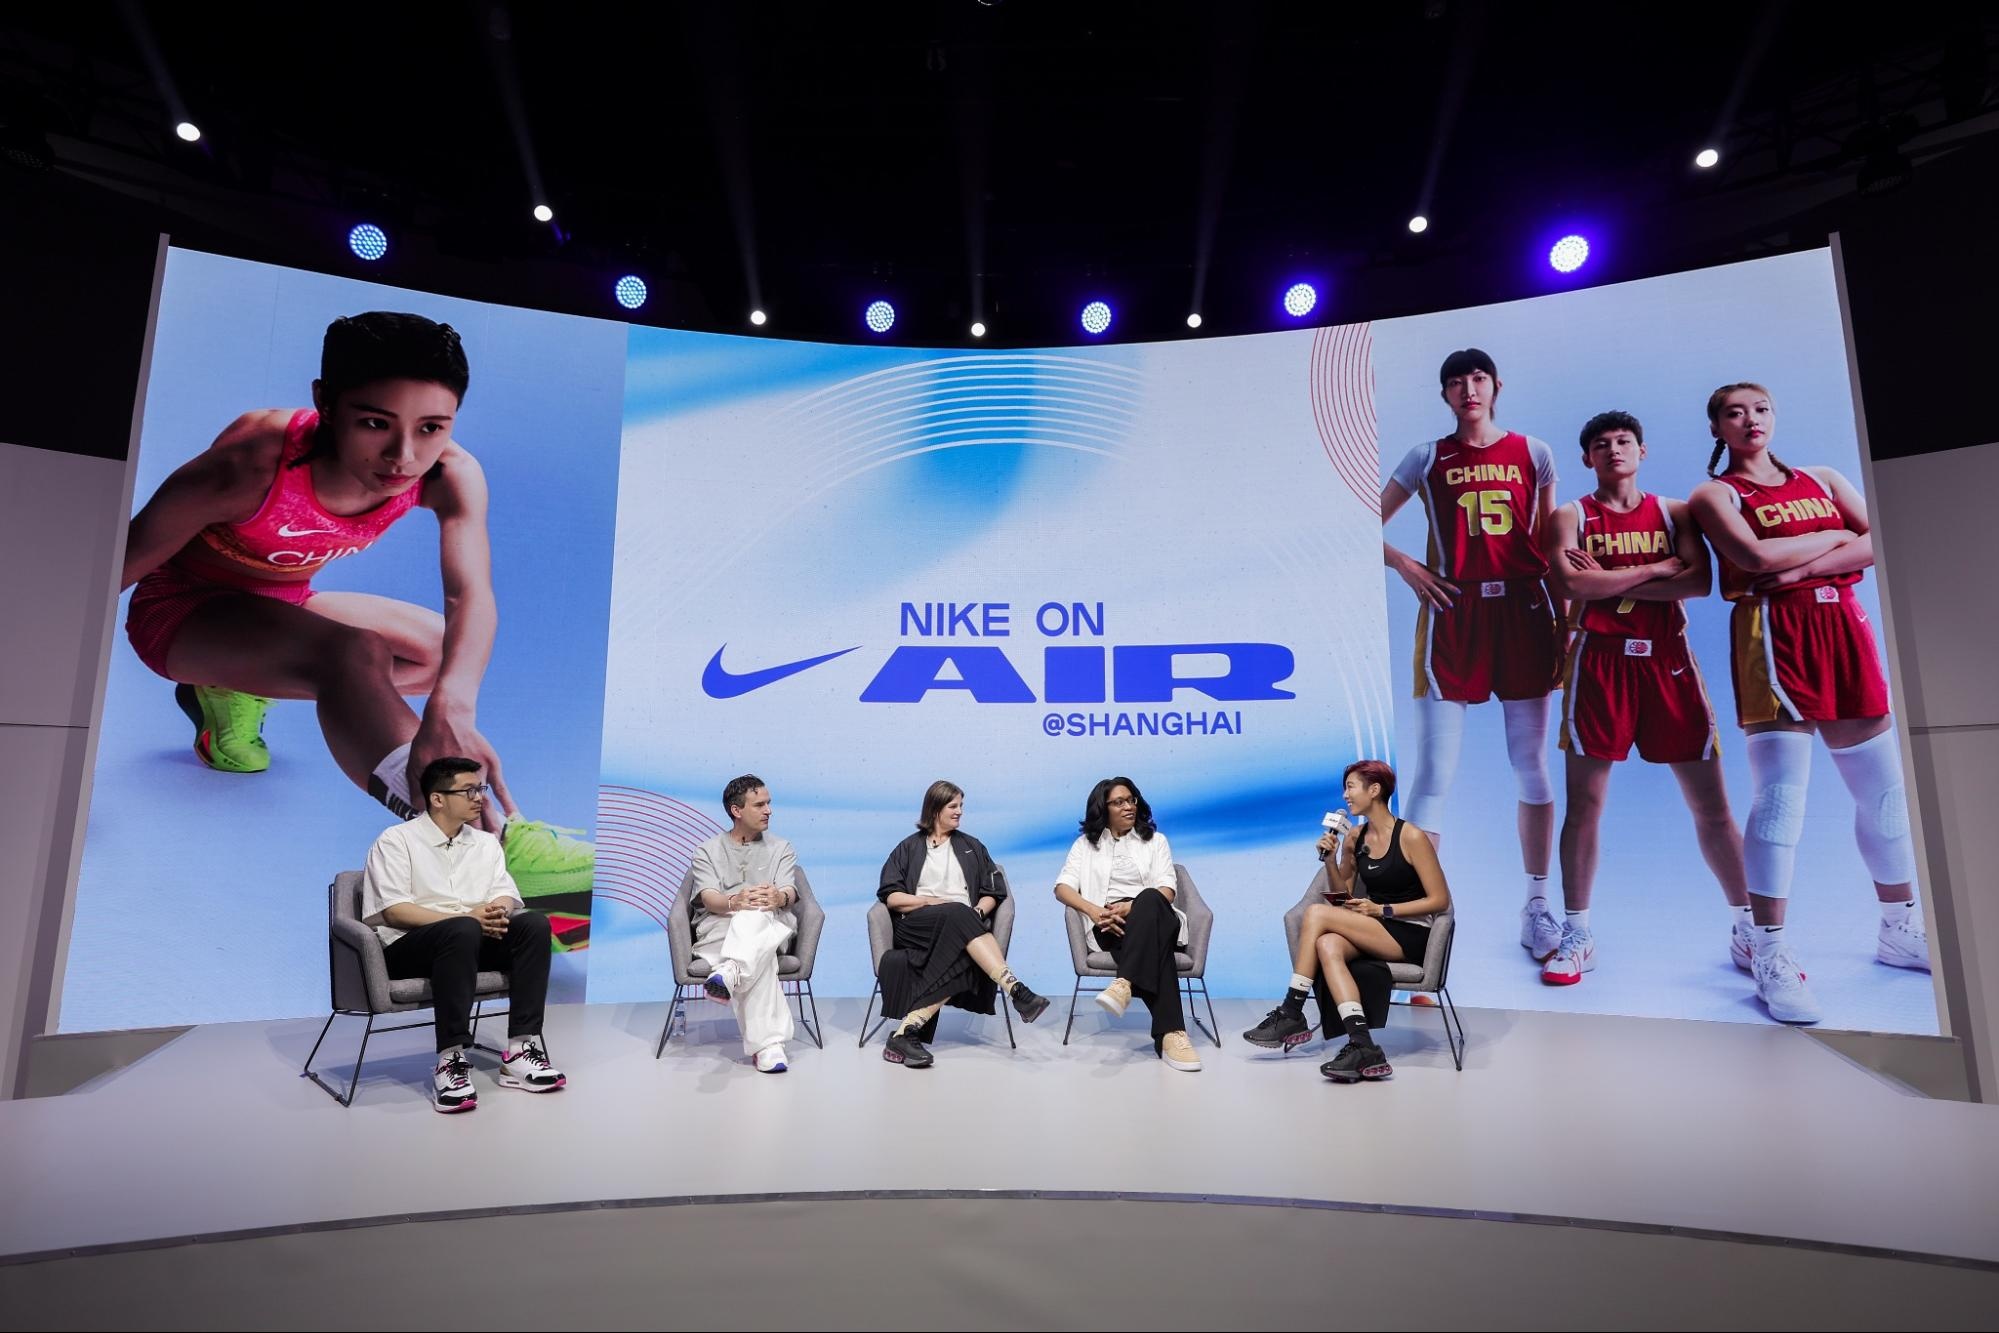 The Nike team, from left, Du Wenjun, Martin Lotti, Kathy Gomez and Janett Nichol at the Nike On Air event in Shanghai. Image: Nike